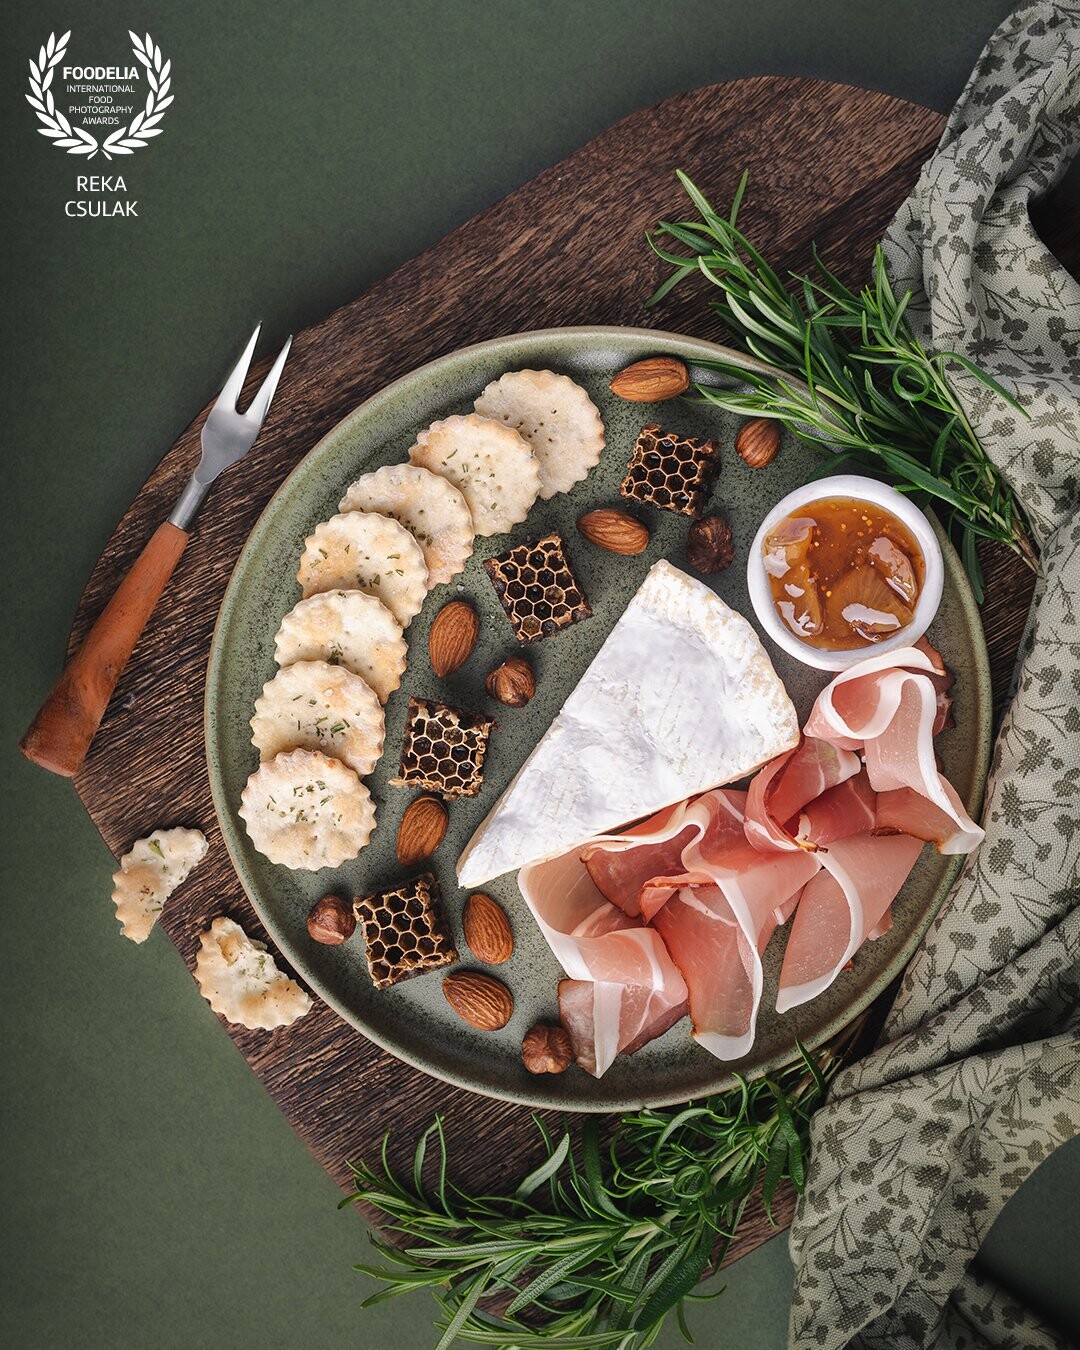 Natural, textured props embrace the premium ingredients of this simple cheeseboard. You need only a little effort to create a plate that has everything that satisfies your inner foodie on a slow moring!